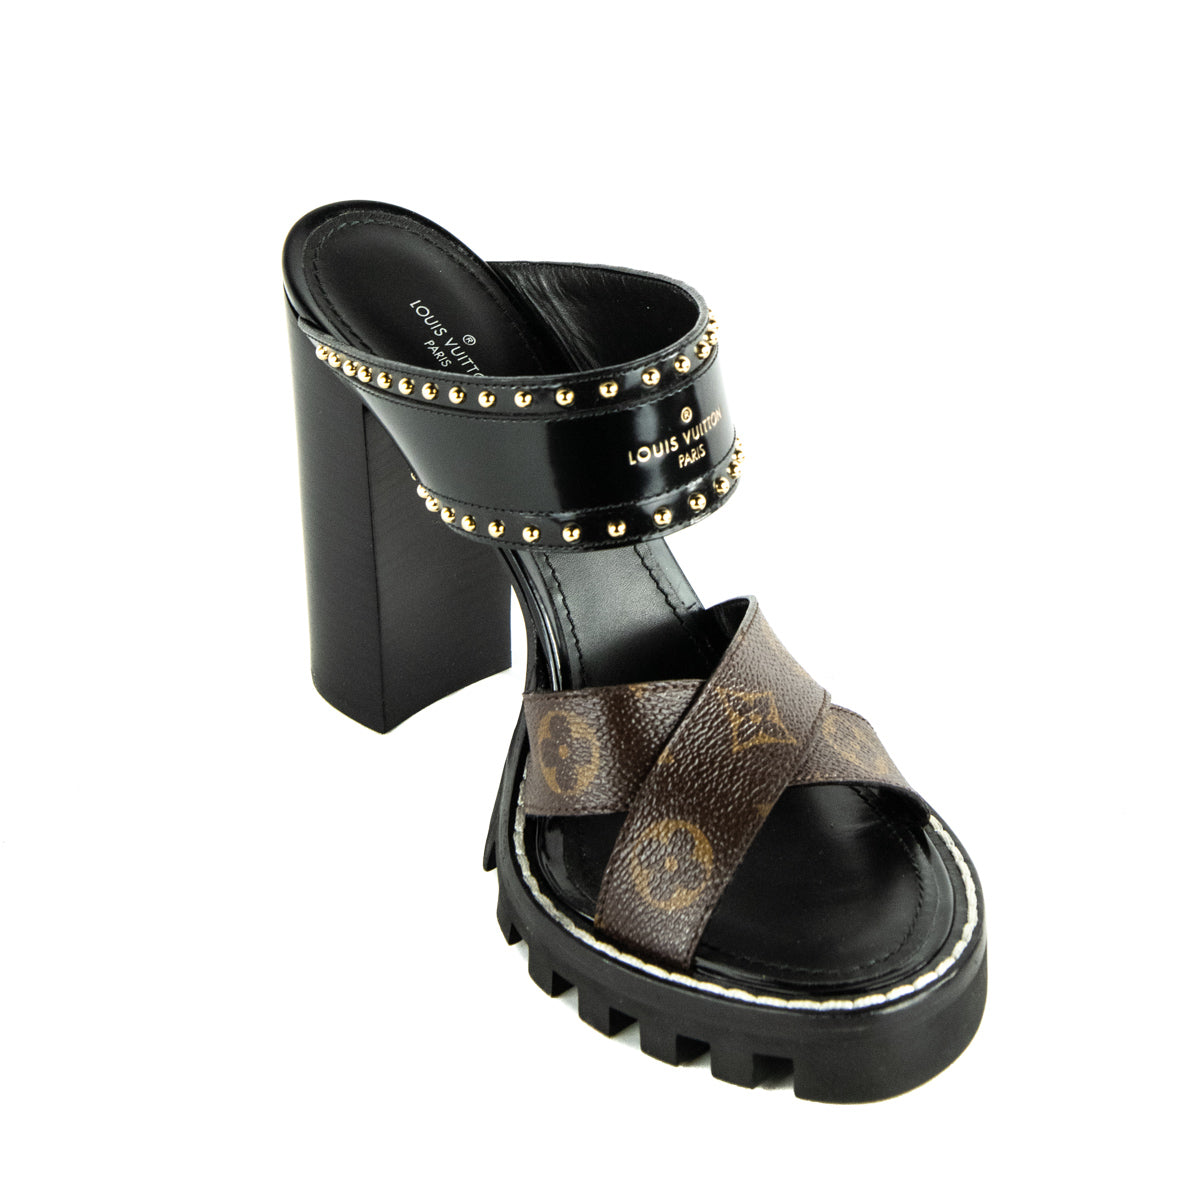 Louis Vuitton Nomad Sandals from